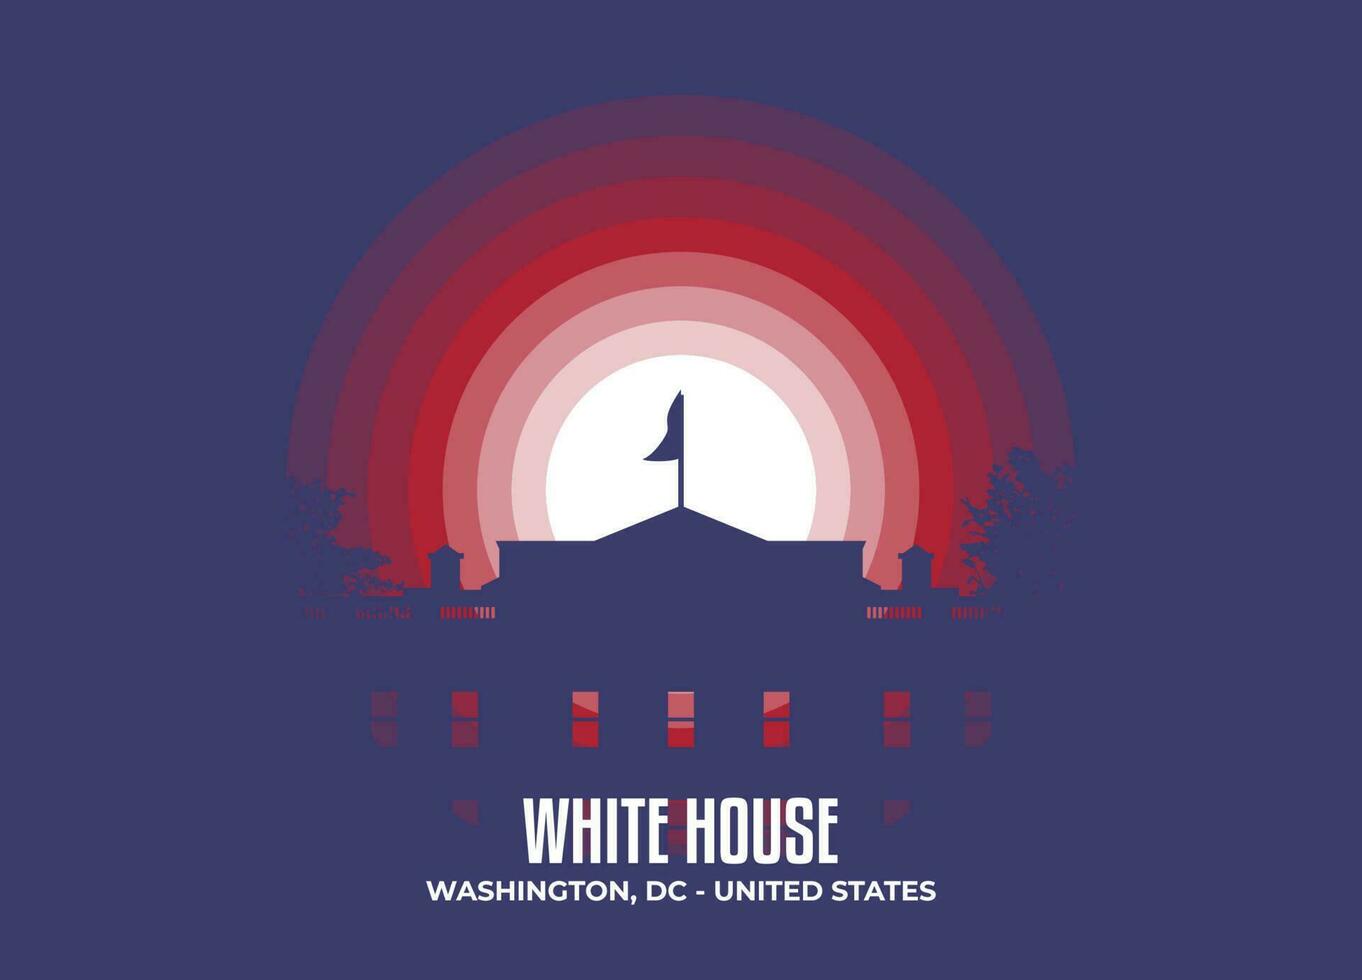 White House. Moonlight illustration of famous historical statue and architecture in United States of America. Color tone based on flag. Vector eps 10